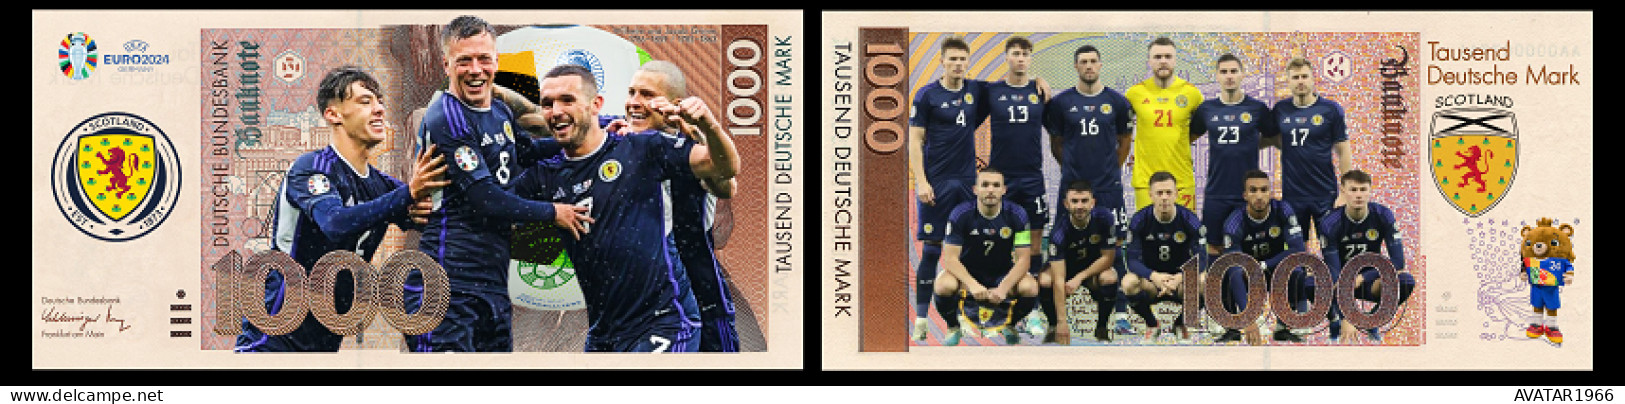 UEFA European Football Championship 2024 qualified country Scotland  8 pieces Germany fantasy paper money